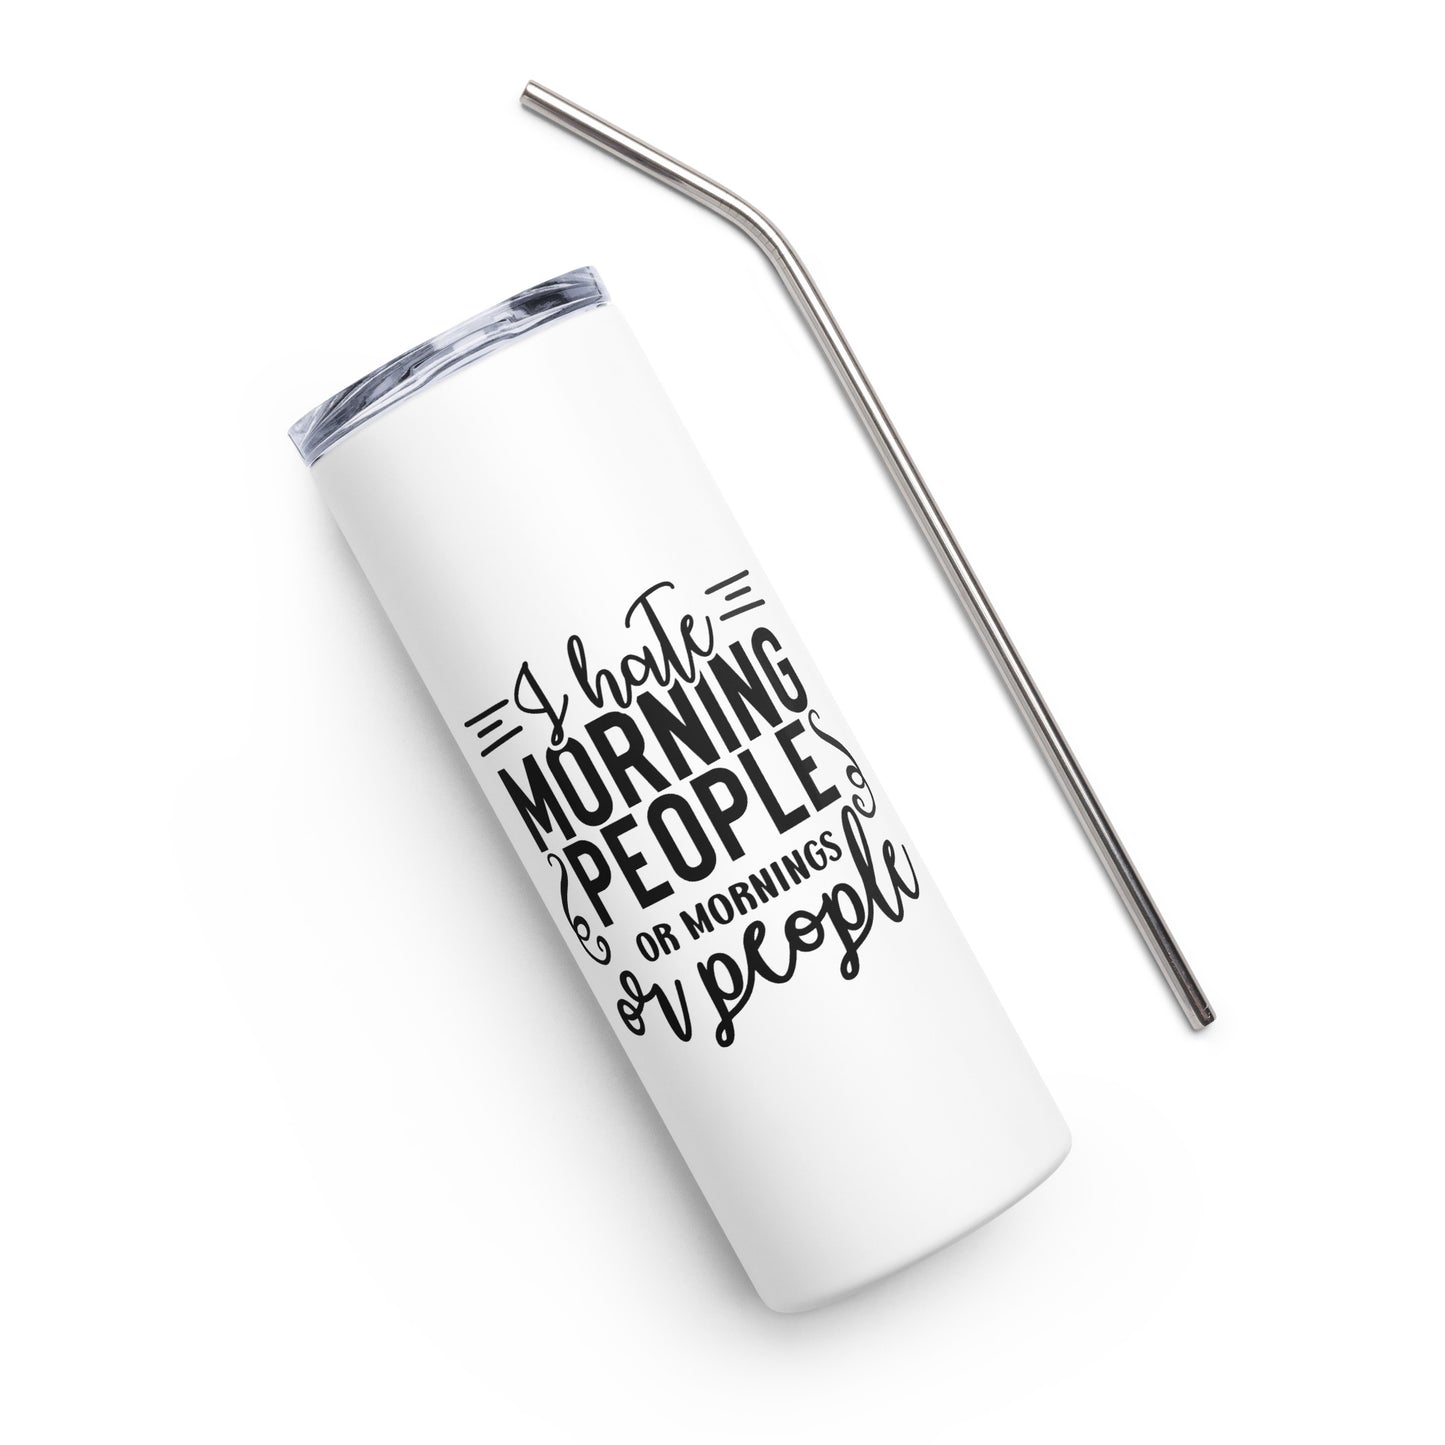 I Hate Morning People or Mornings or People Stainless steel tumbler